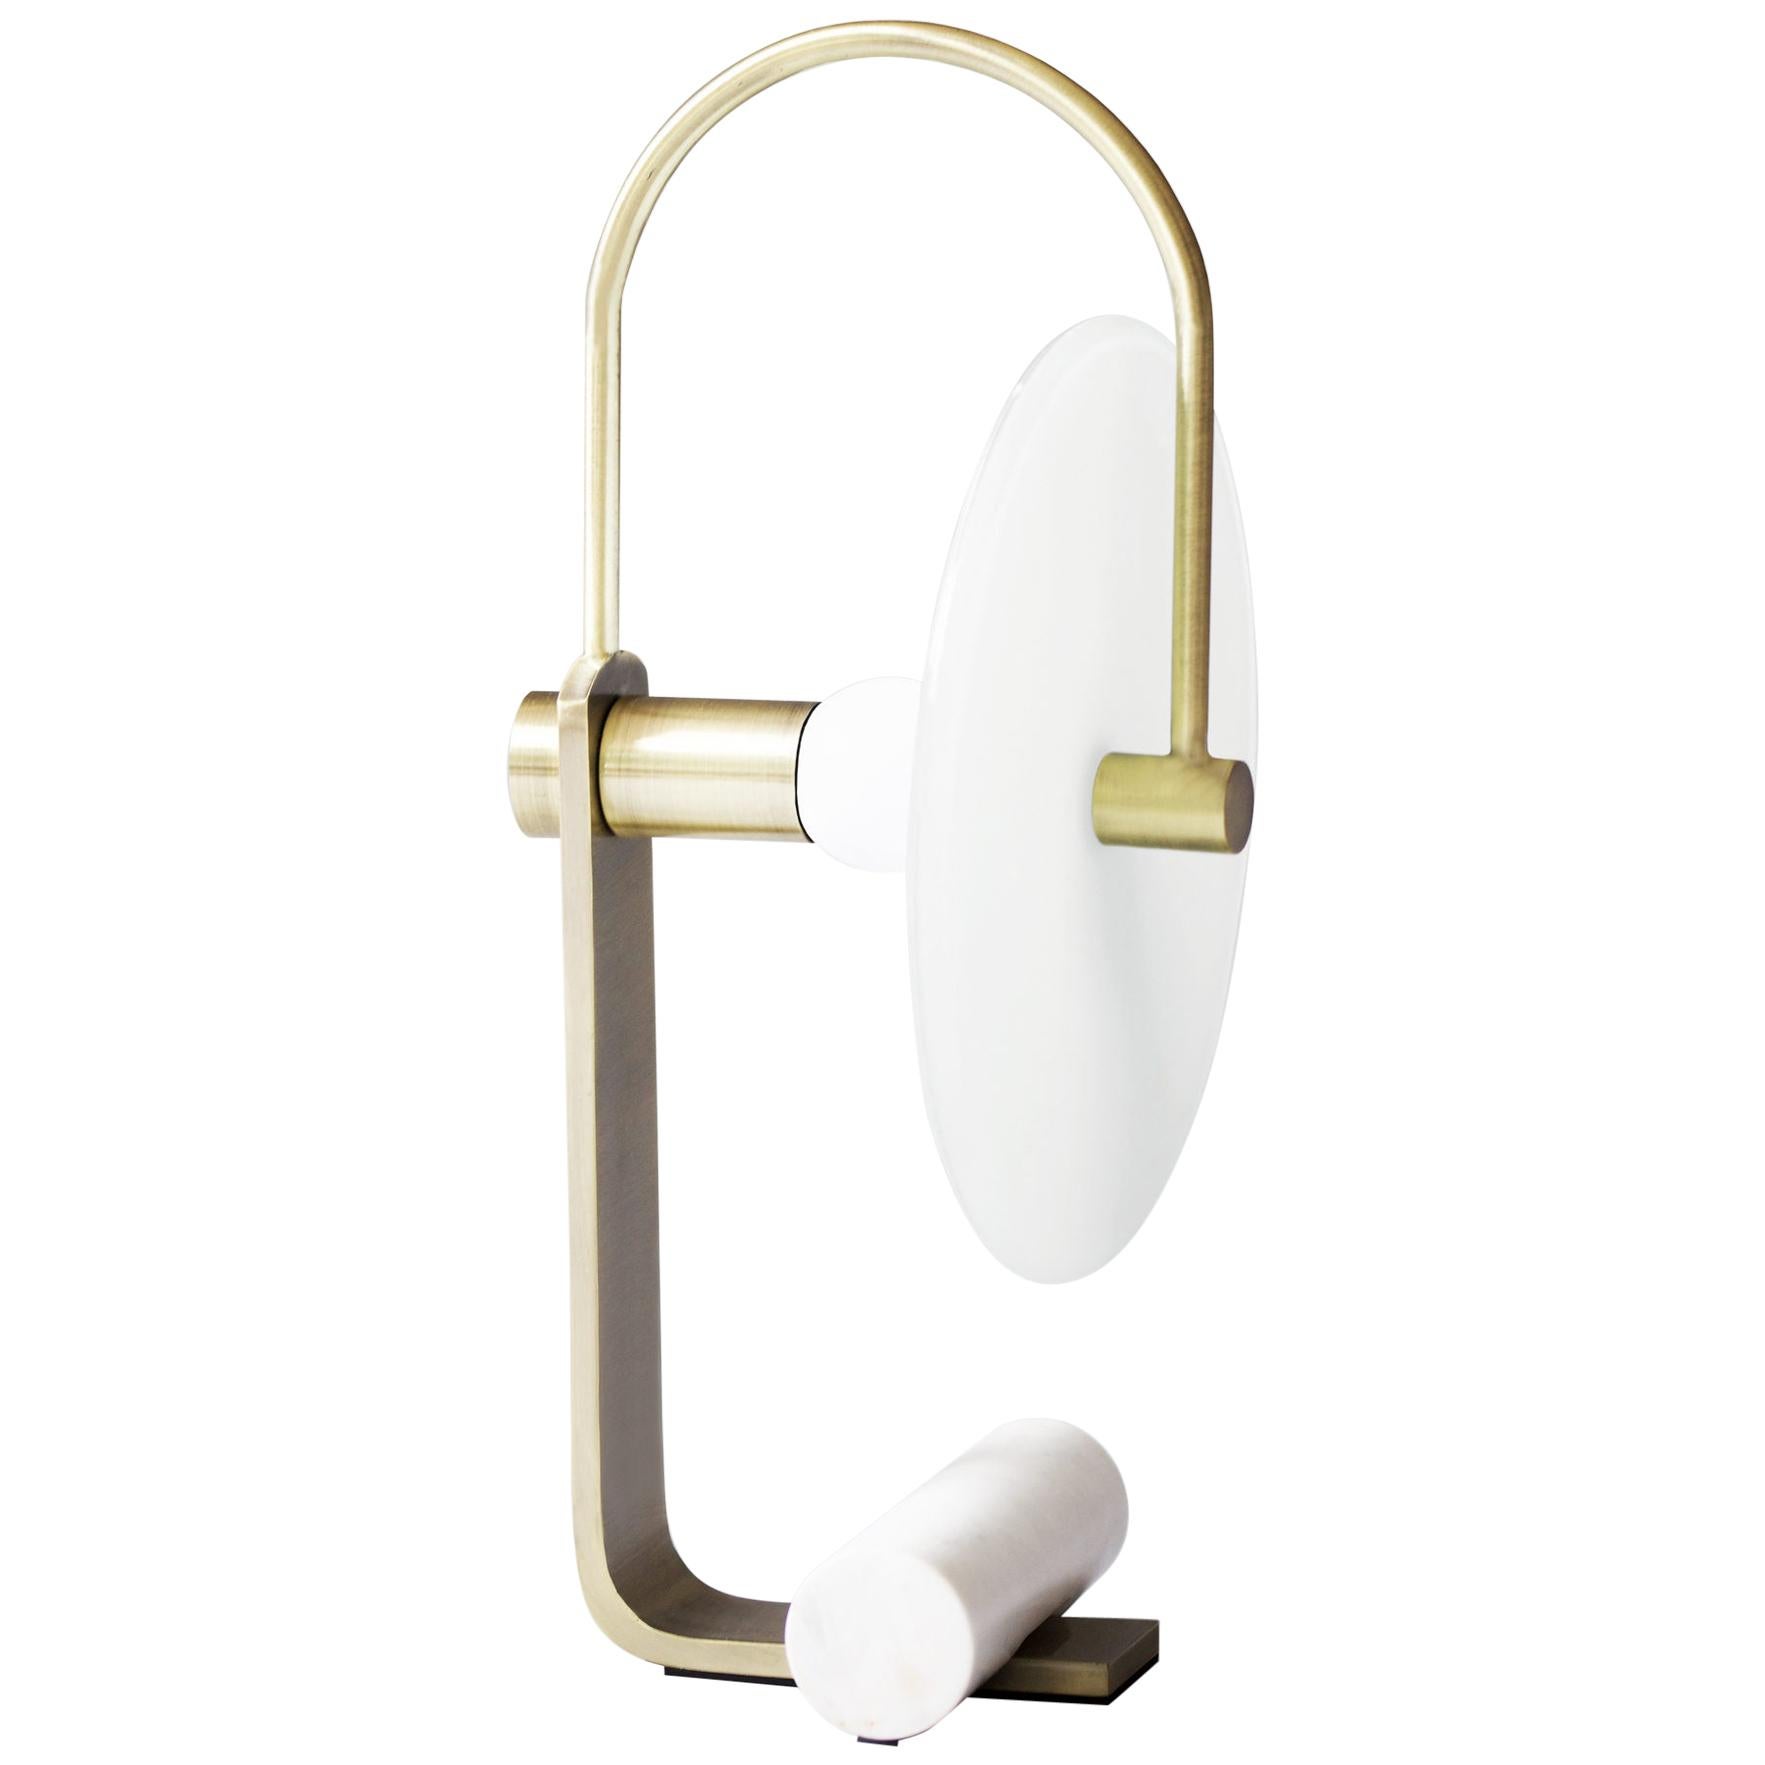 Brass "Universe" Table Lamp, Square in Circle